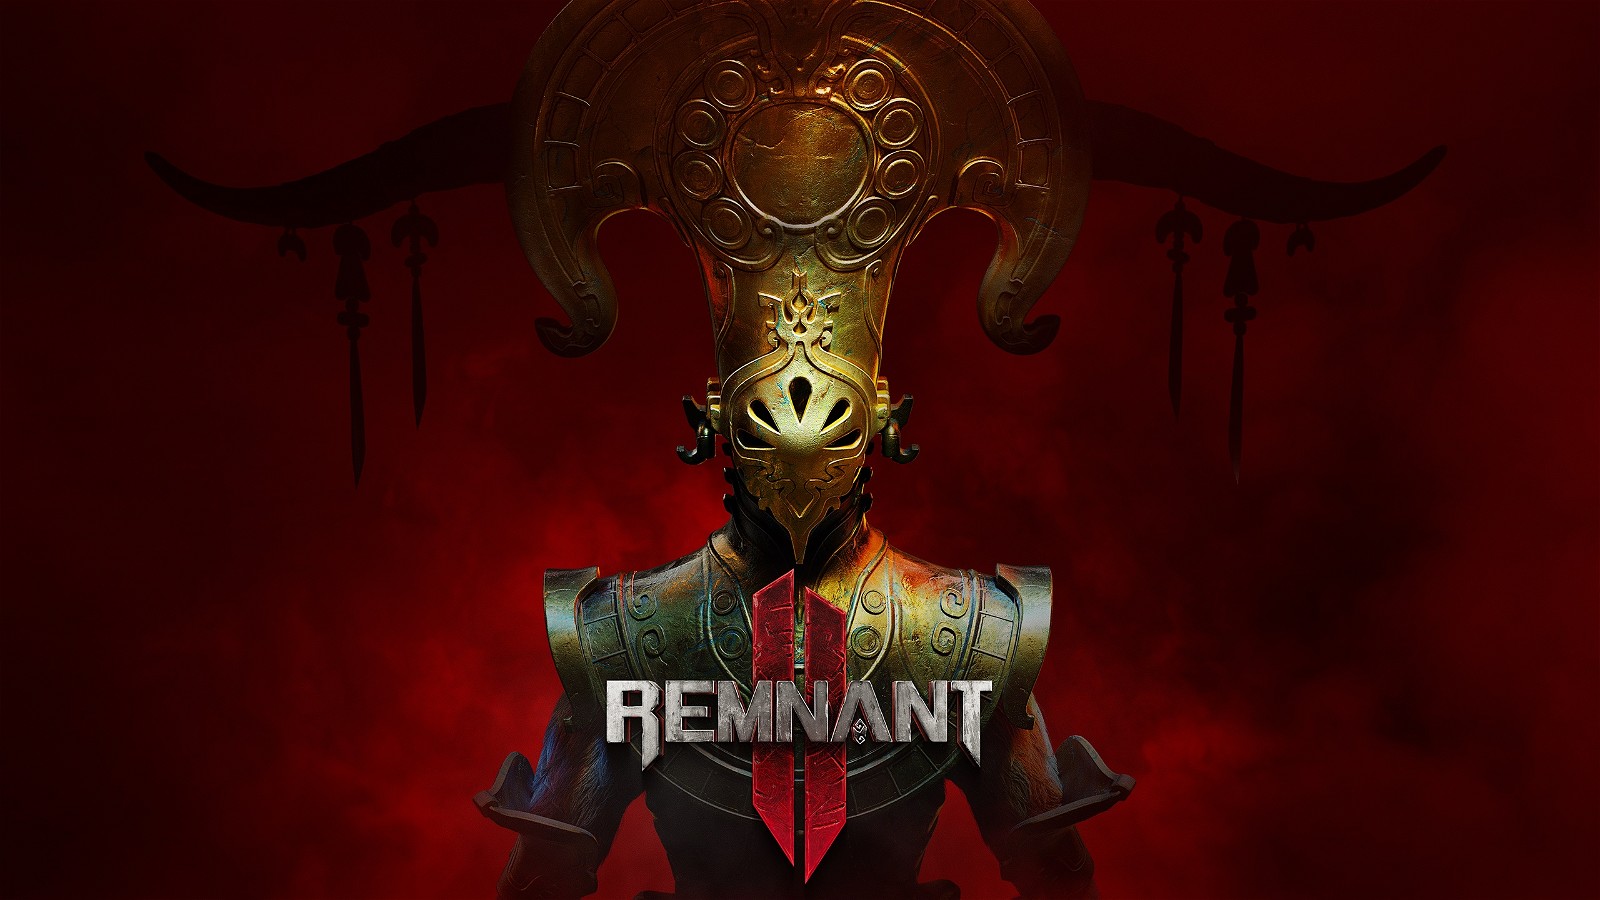 A promotional cover for Remnant 2